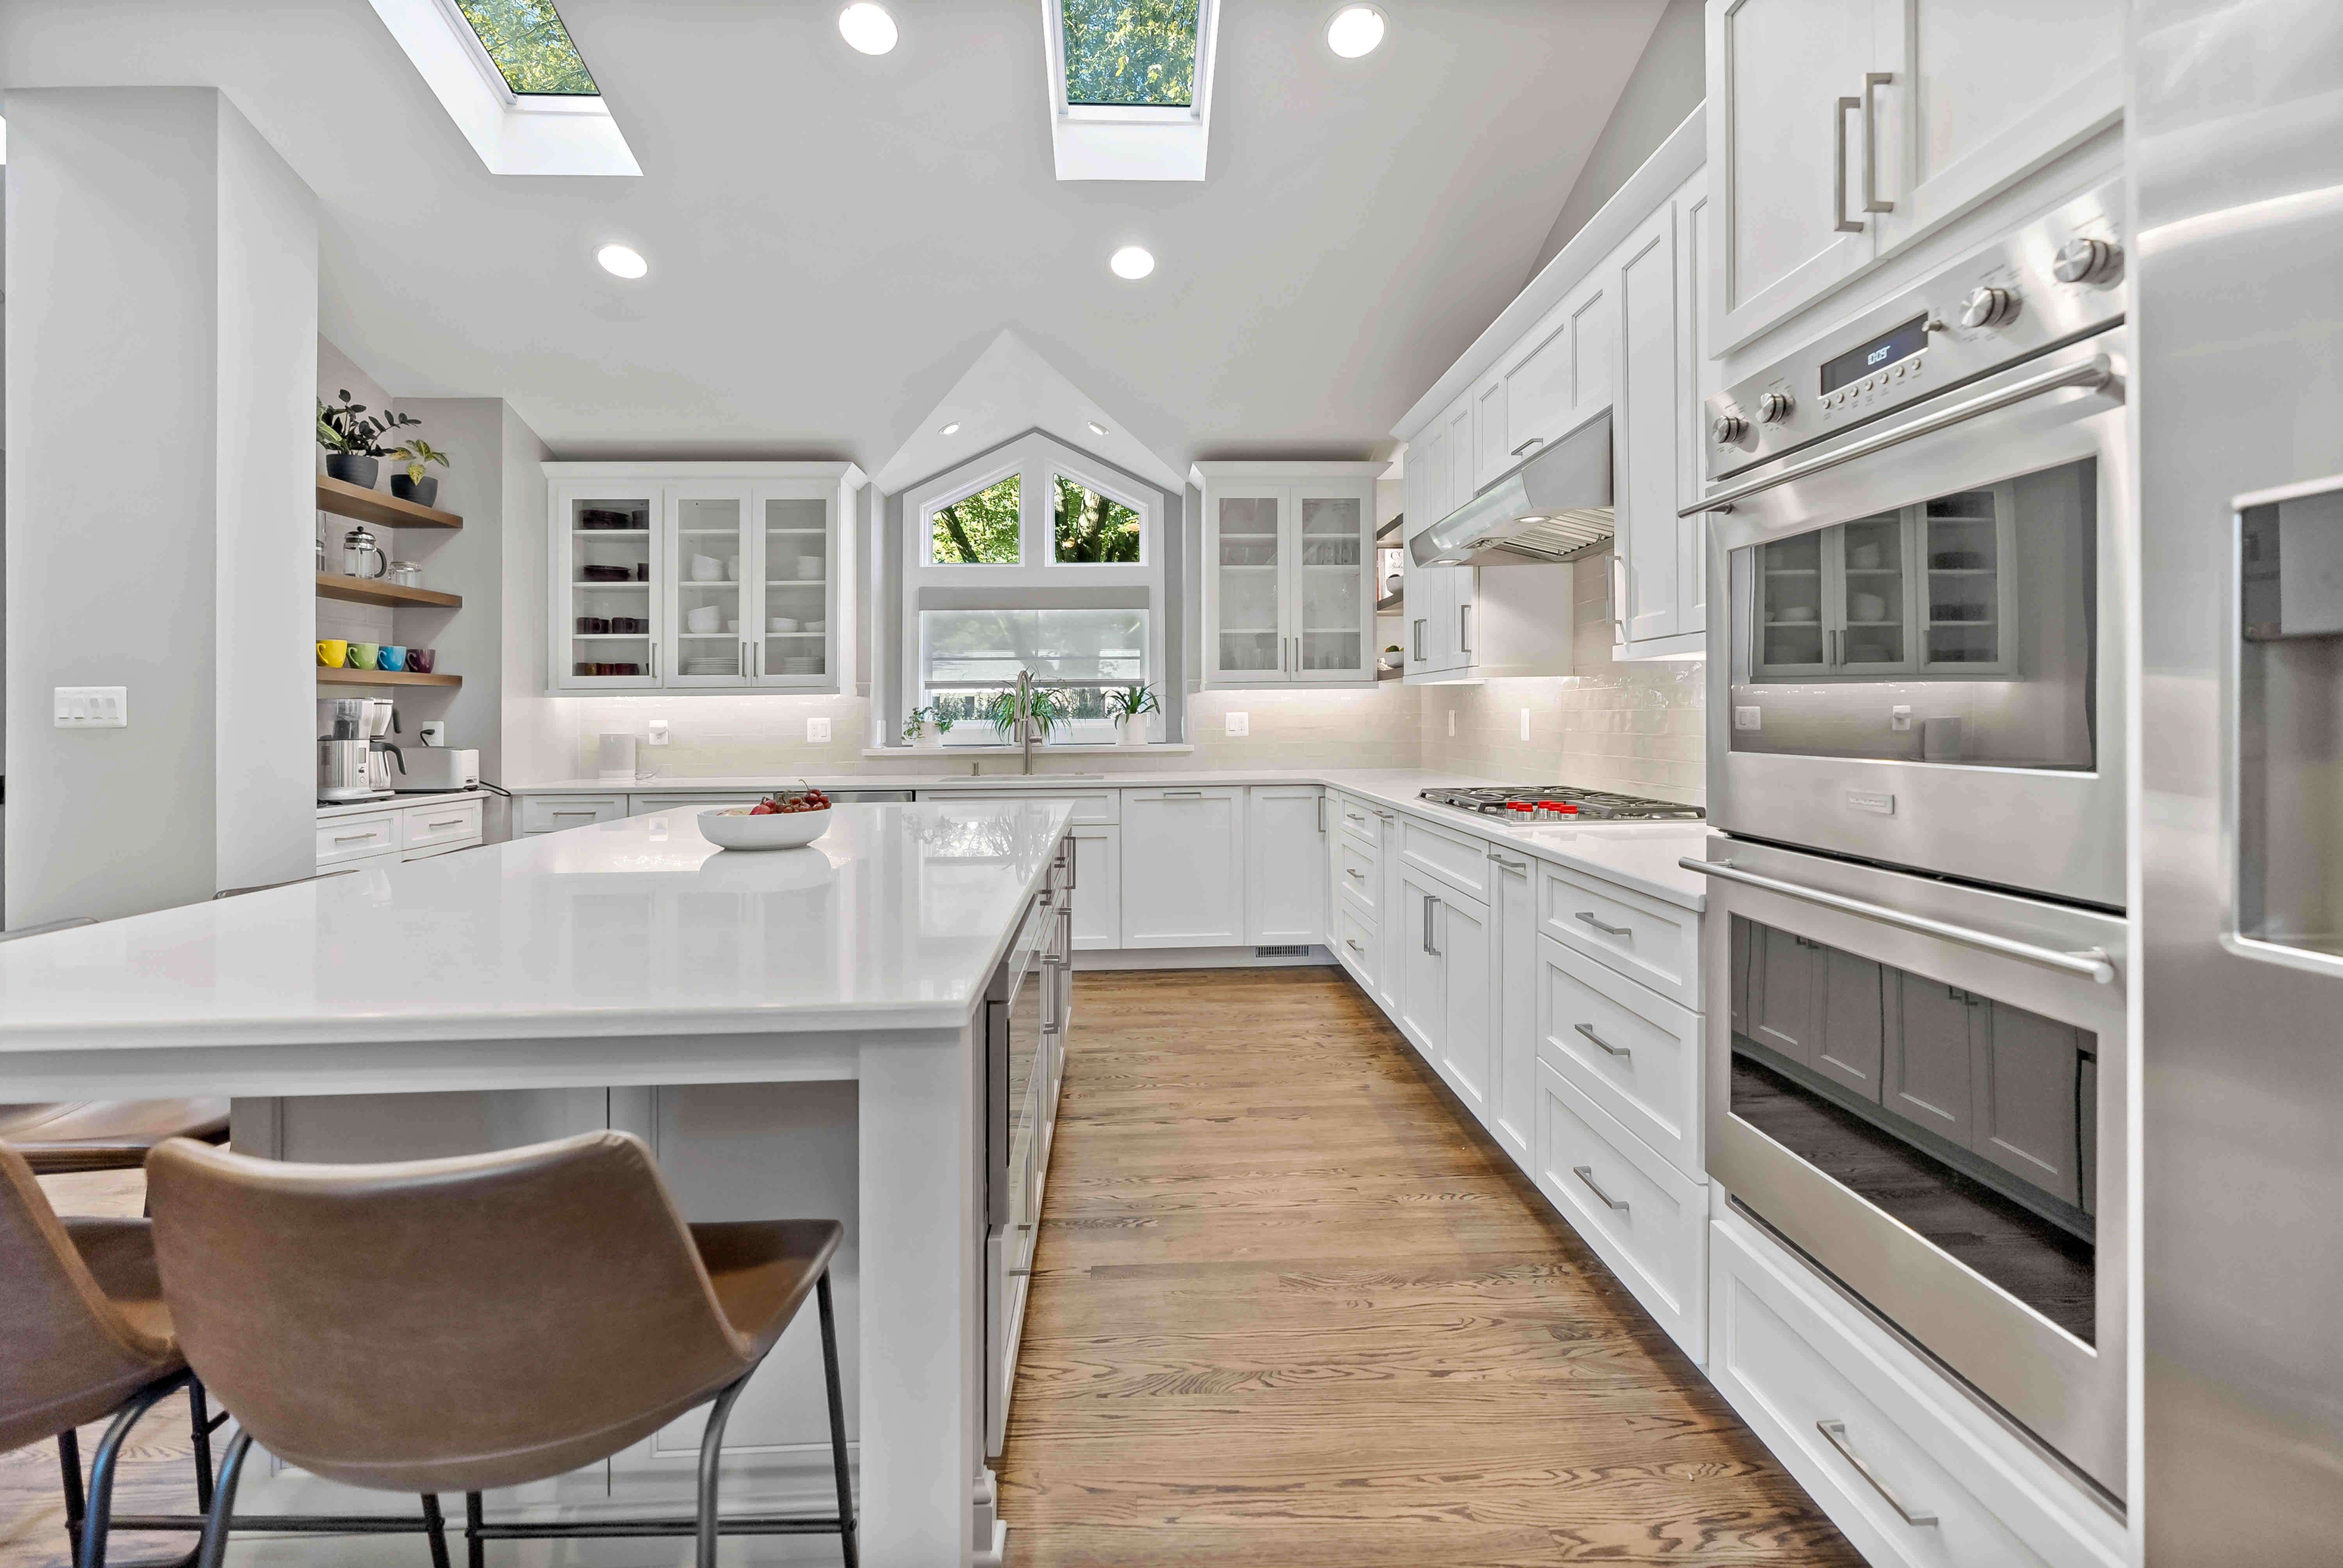 White countertops and cabinets in kitchen with hard wood floors